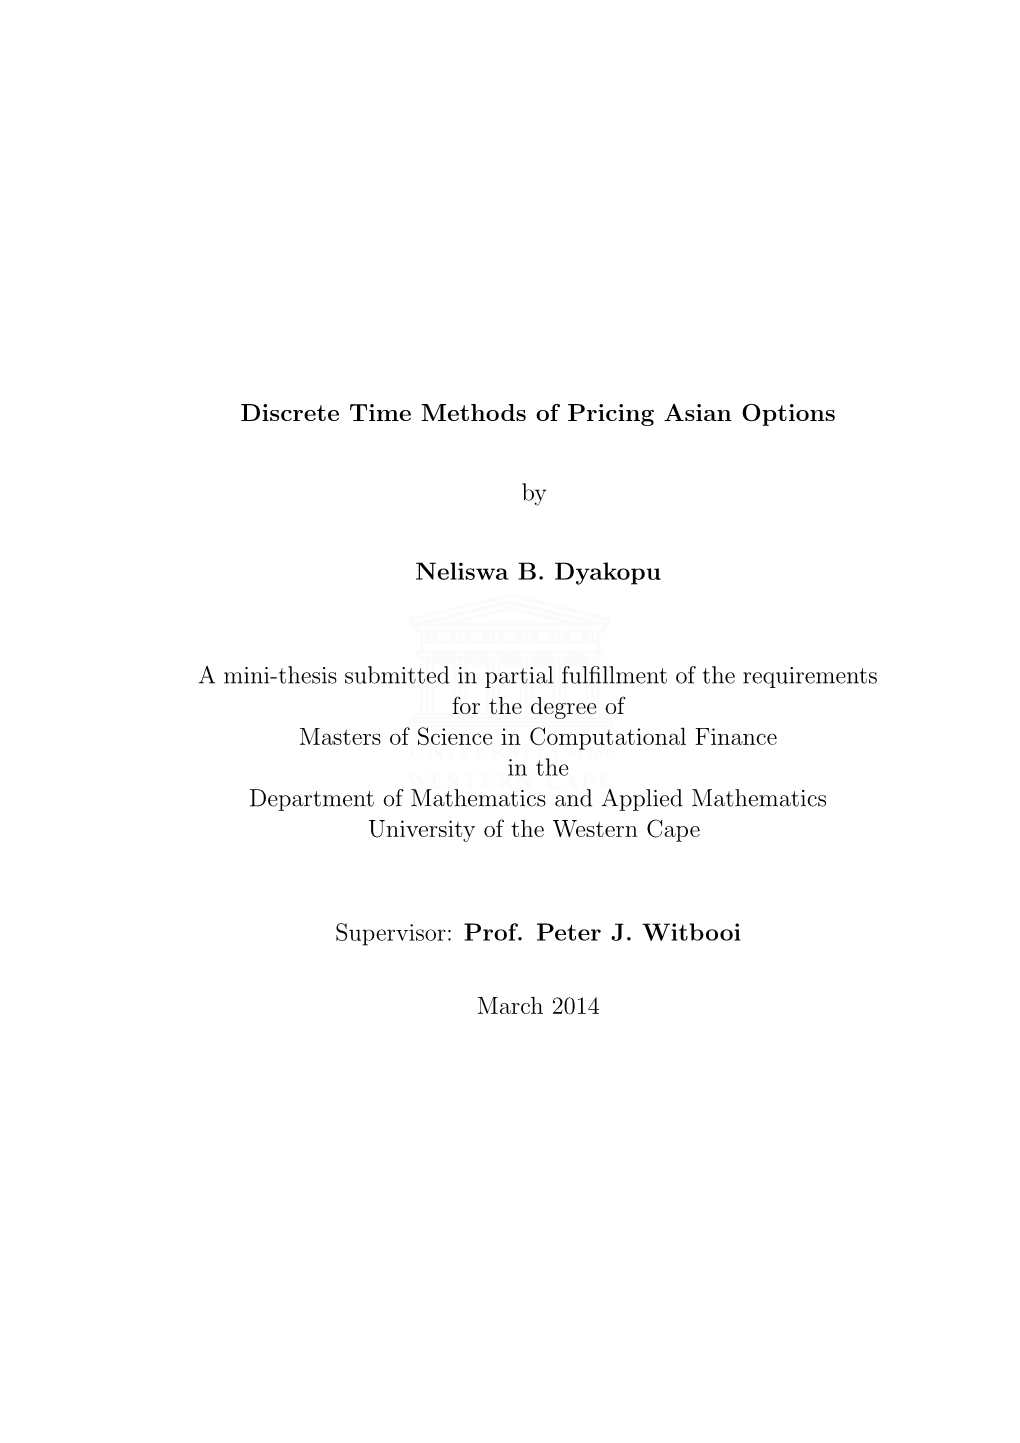 Discrete Time Methods of Pricing Asian Options by Neliswa B. Dyakopu a Mini-Thesis Submitted in Partial Fulfillment of the Requi